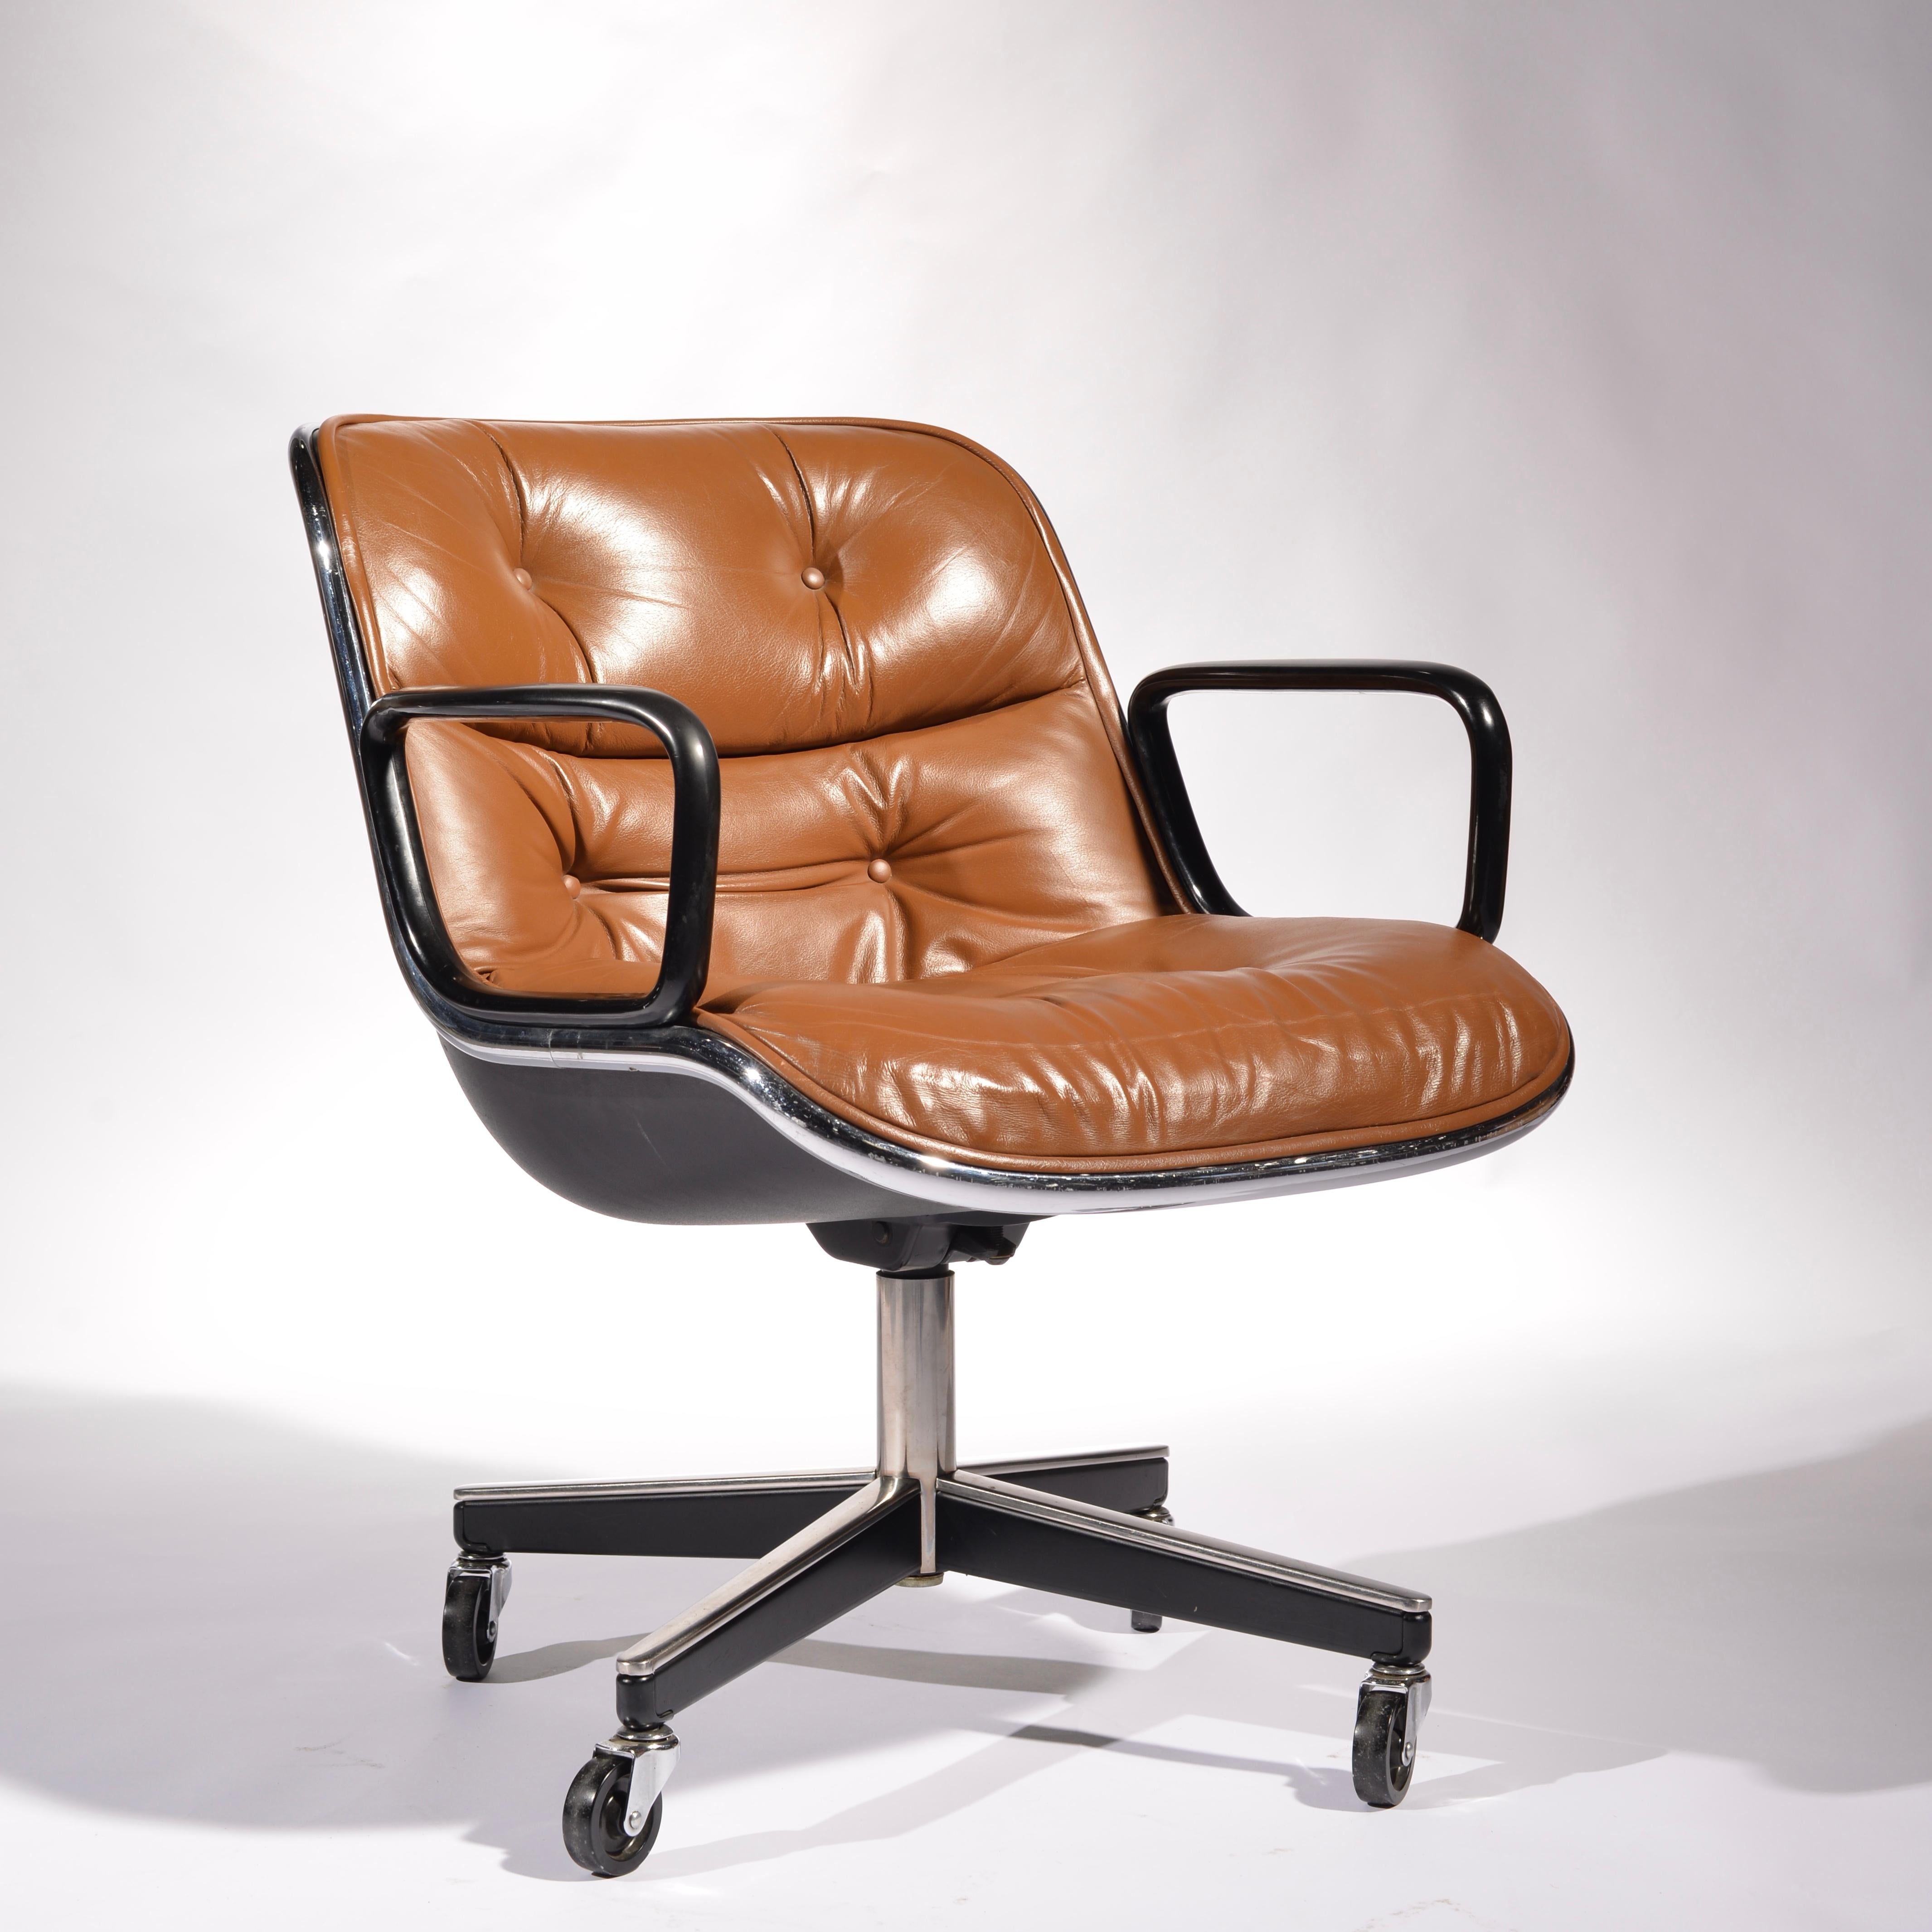 Mid-20th Century 35 Charles Pollock Executive Desk Chairs for Knoll in Cognac Leather